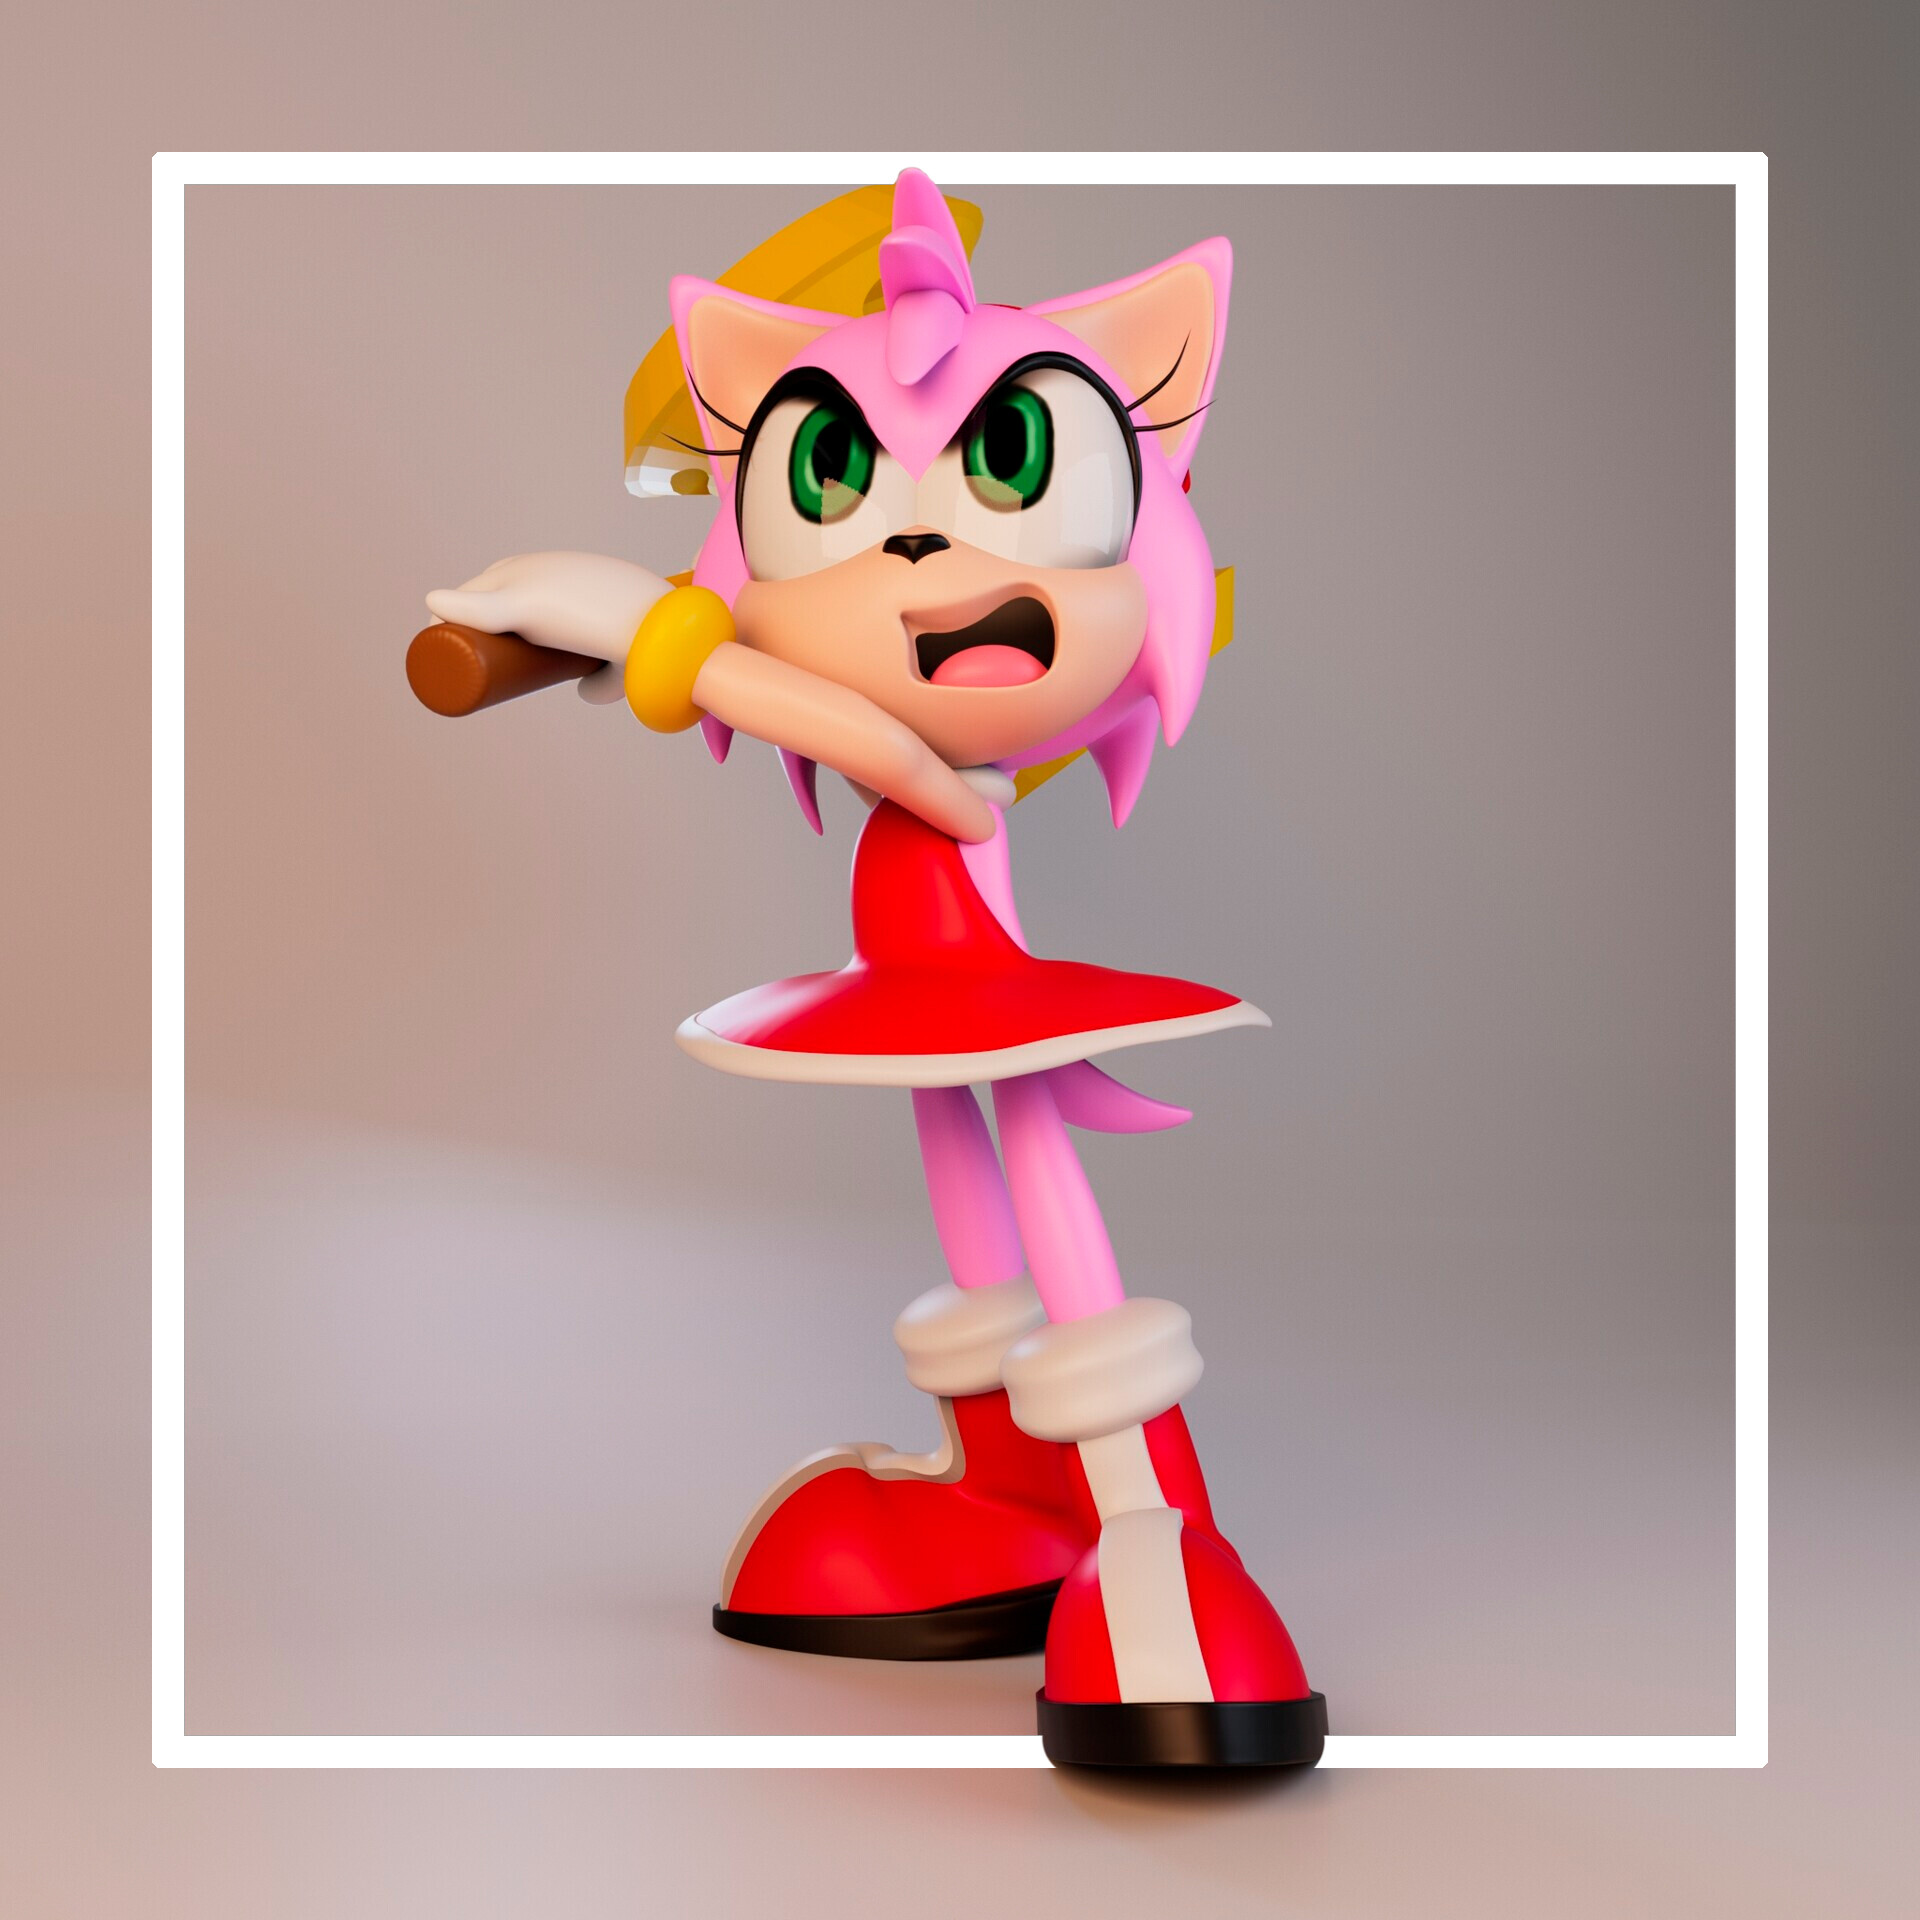 233784 - safe, artist:tiolimond, amy rose (sonic), sonic the